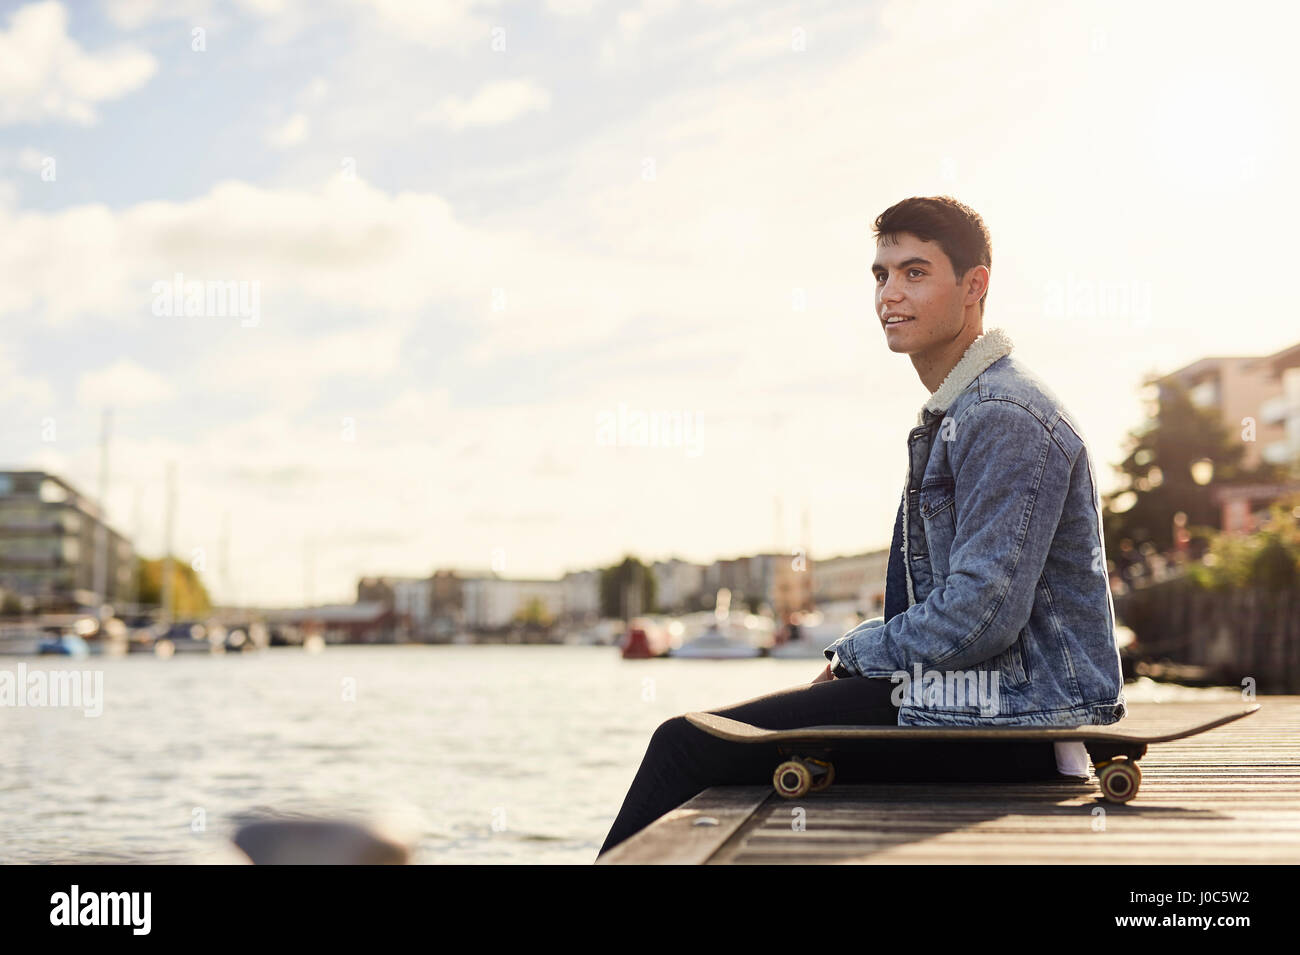 Young man sitting by river, skateboard beside him, Bristol, UK Stock Photo